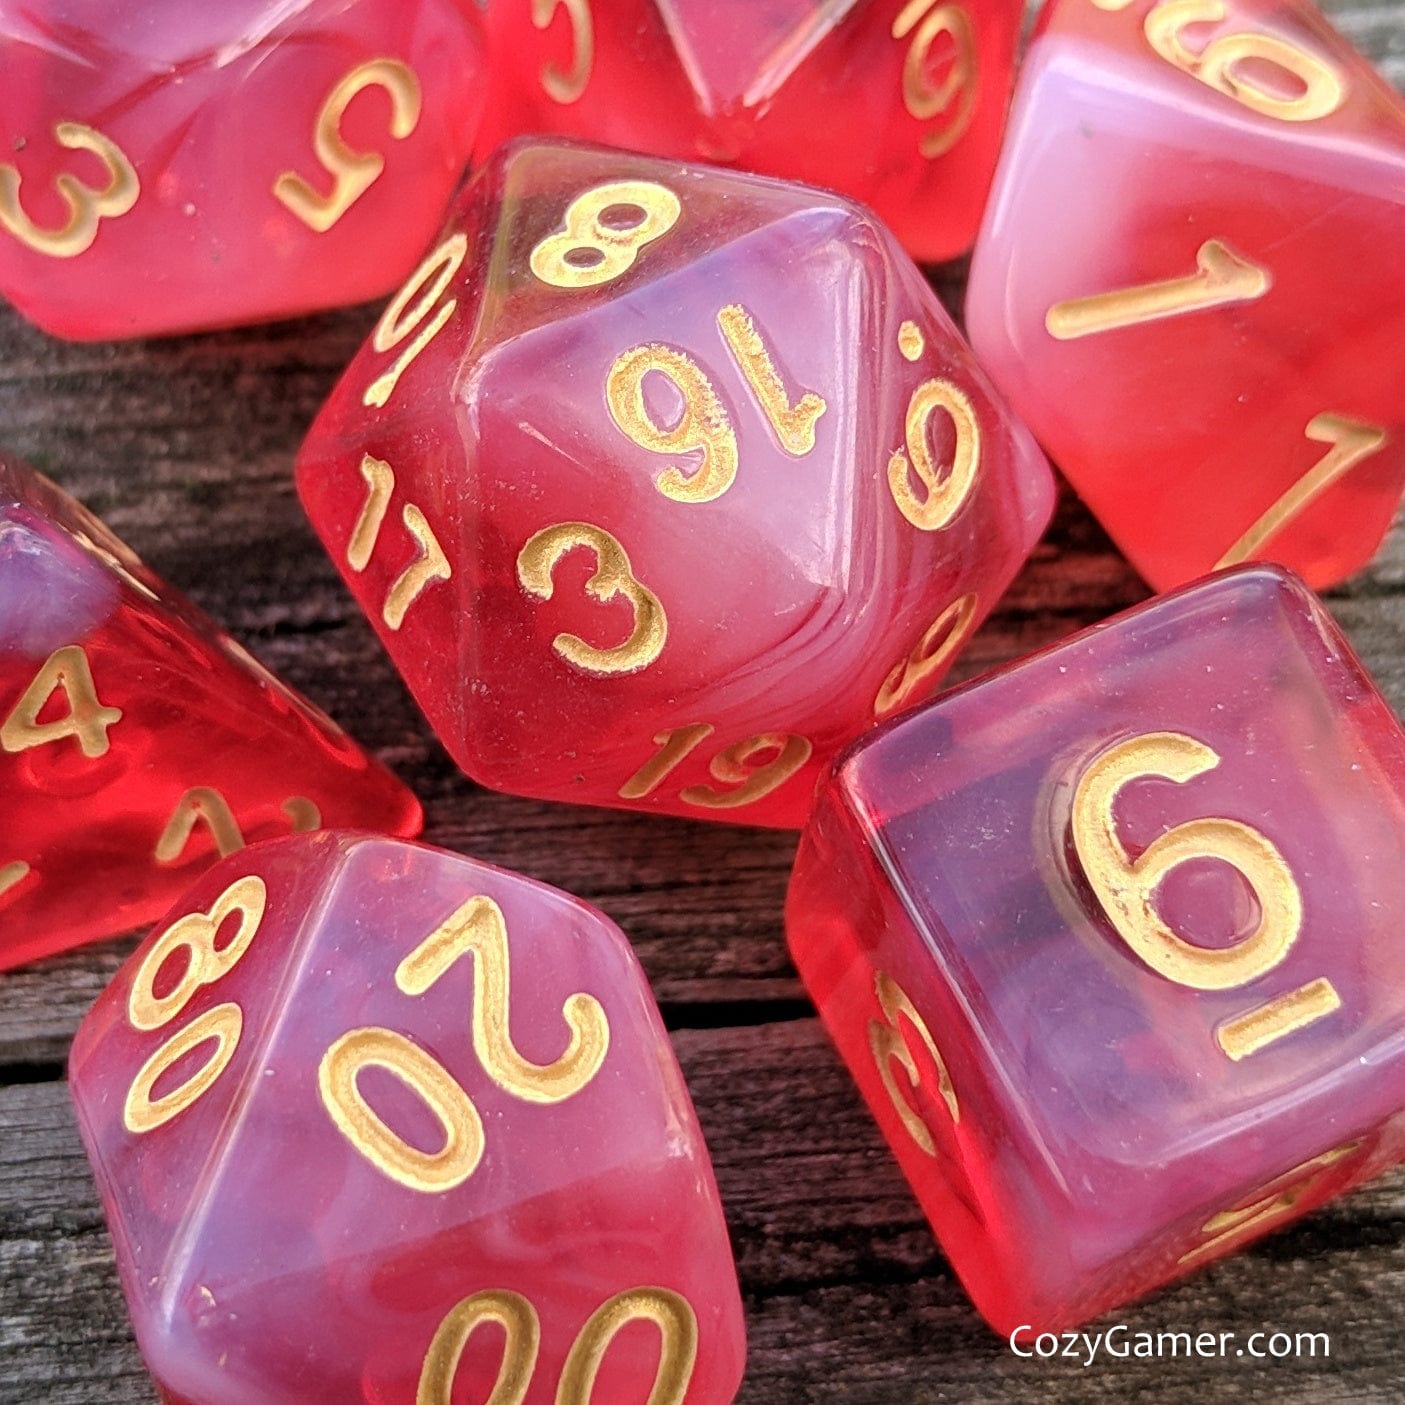 White Blood Cells DnD Dice Set, Bright Red Dice - CozyGamer